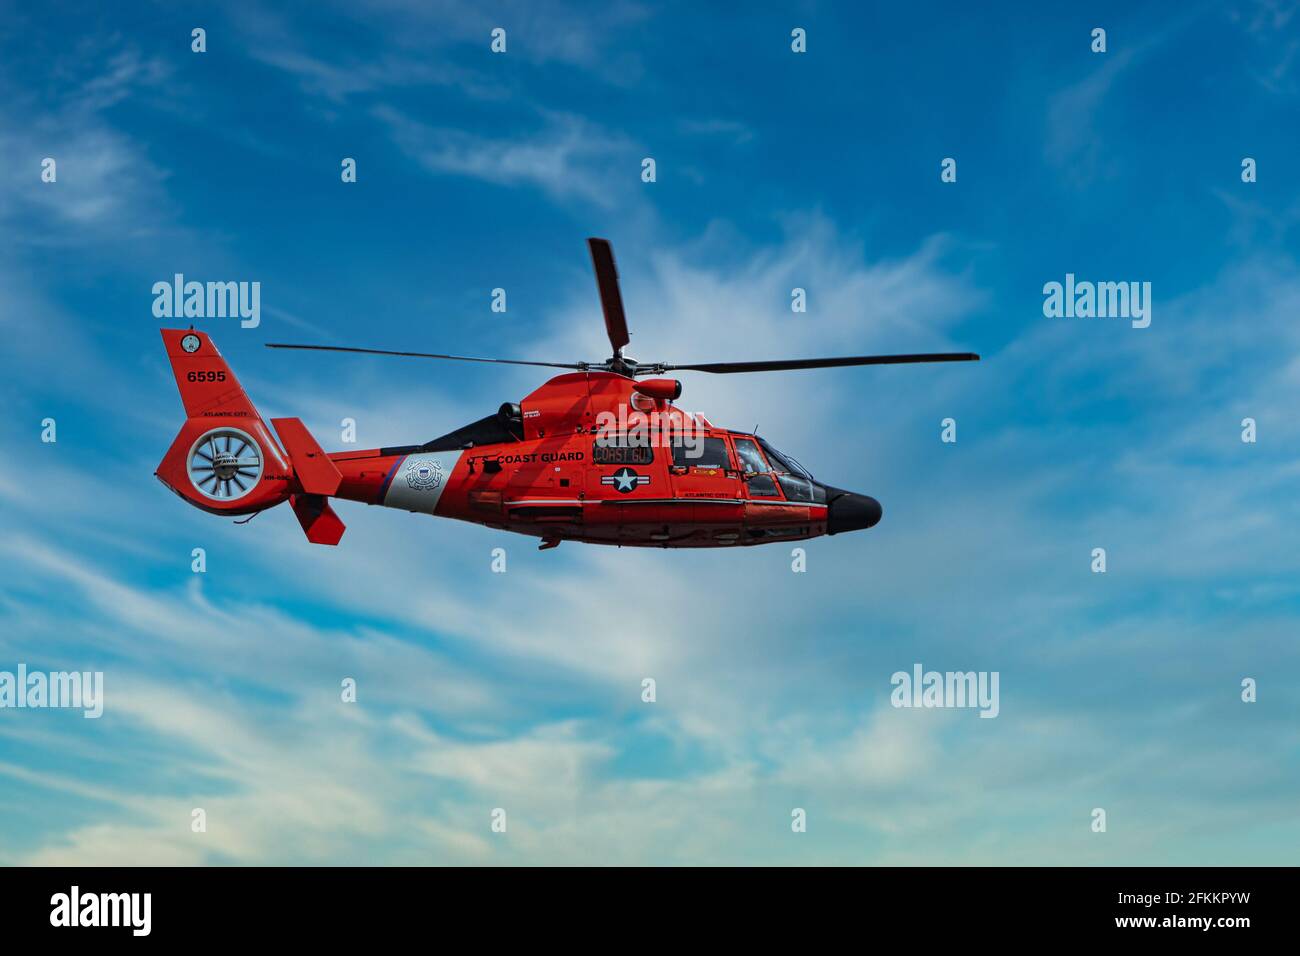 An Atlantic City Coast Guard helicopter in flight. Stock Photo